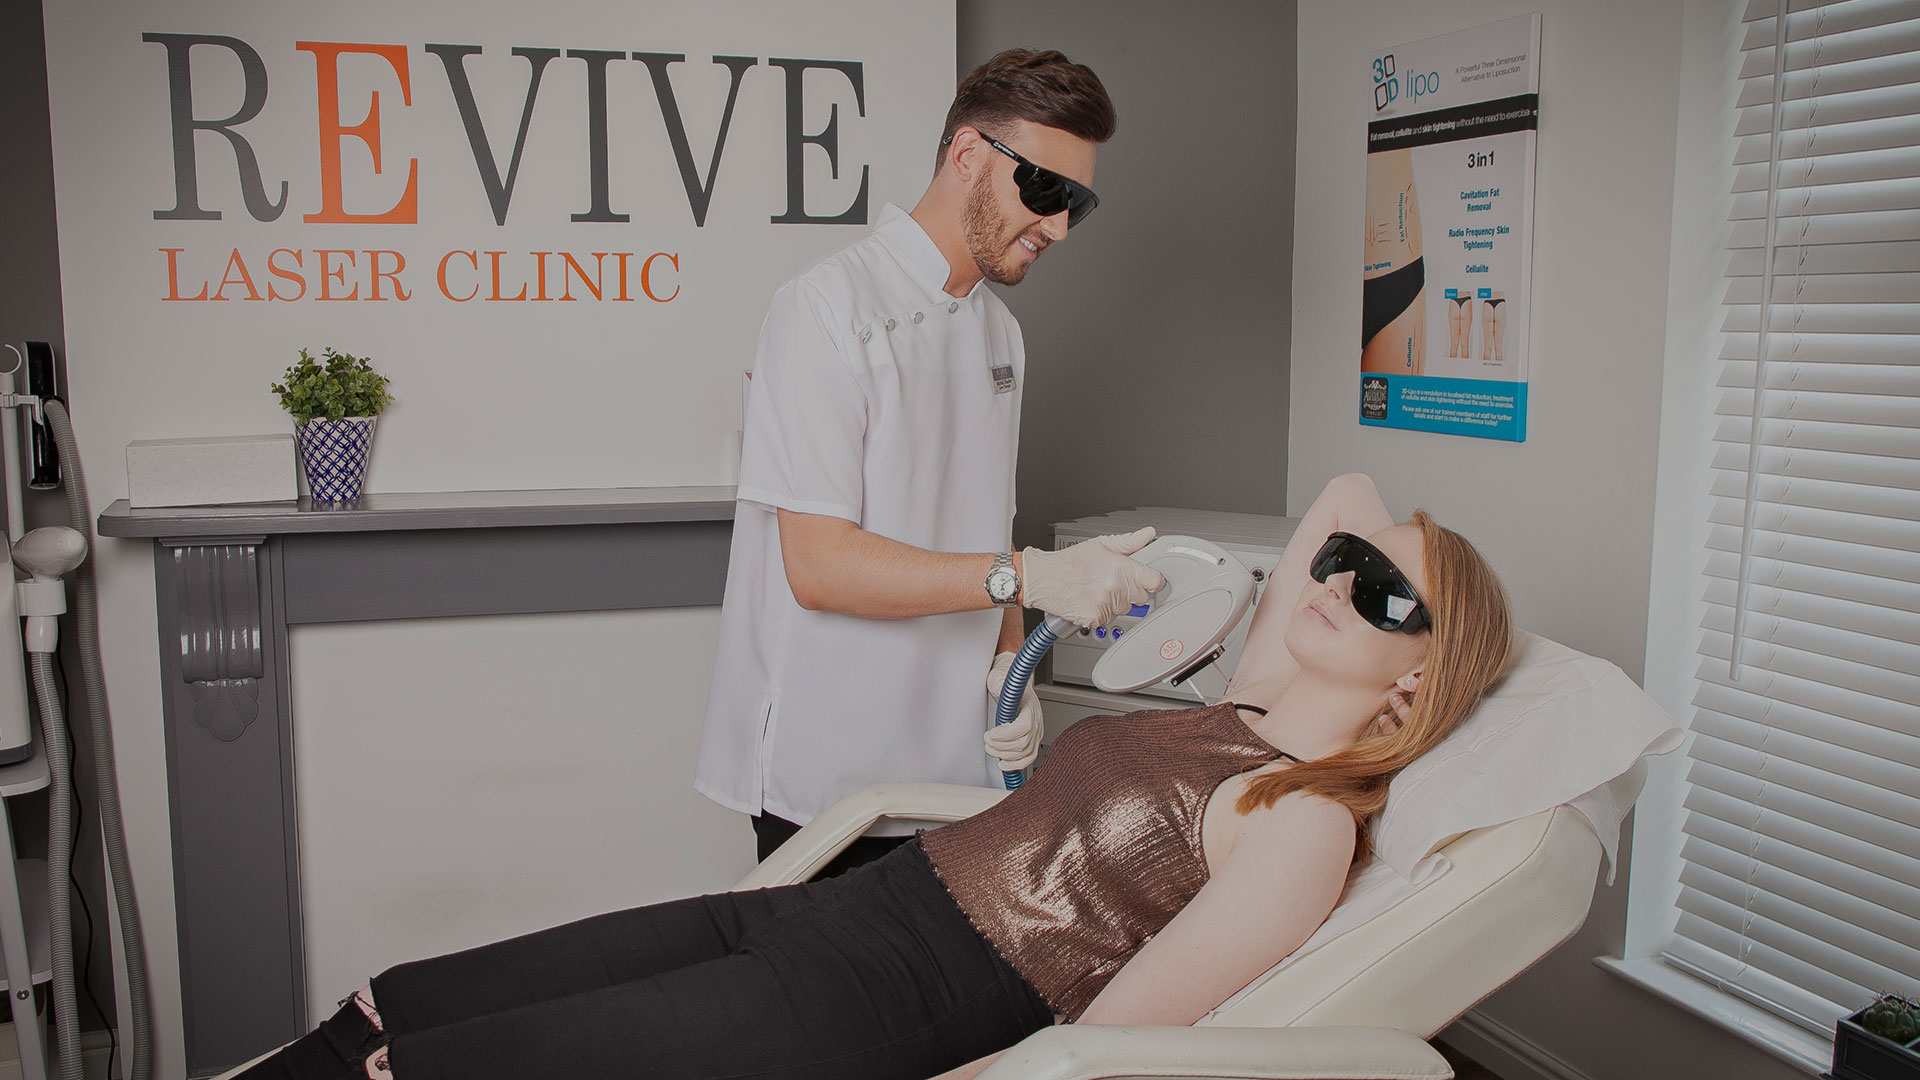 Revive Laser Clinic – Our Company is well-known for our expertise in skin  conditions and has perfected a wide range of highly effective face and body  treatments.